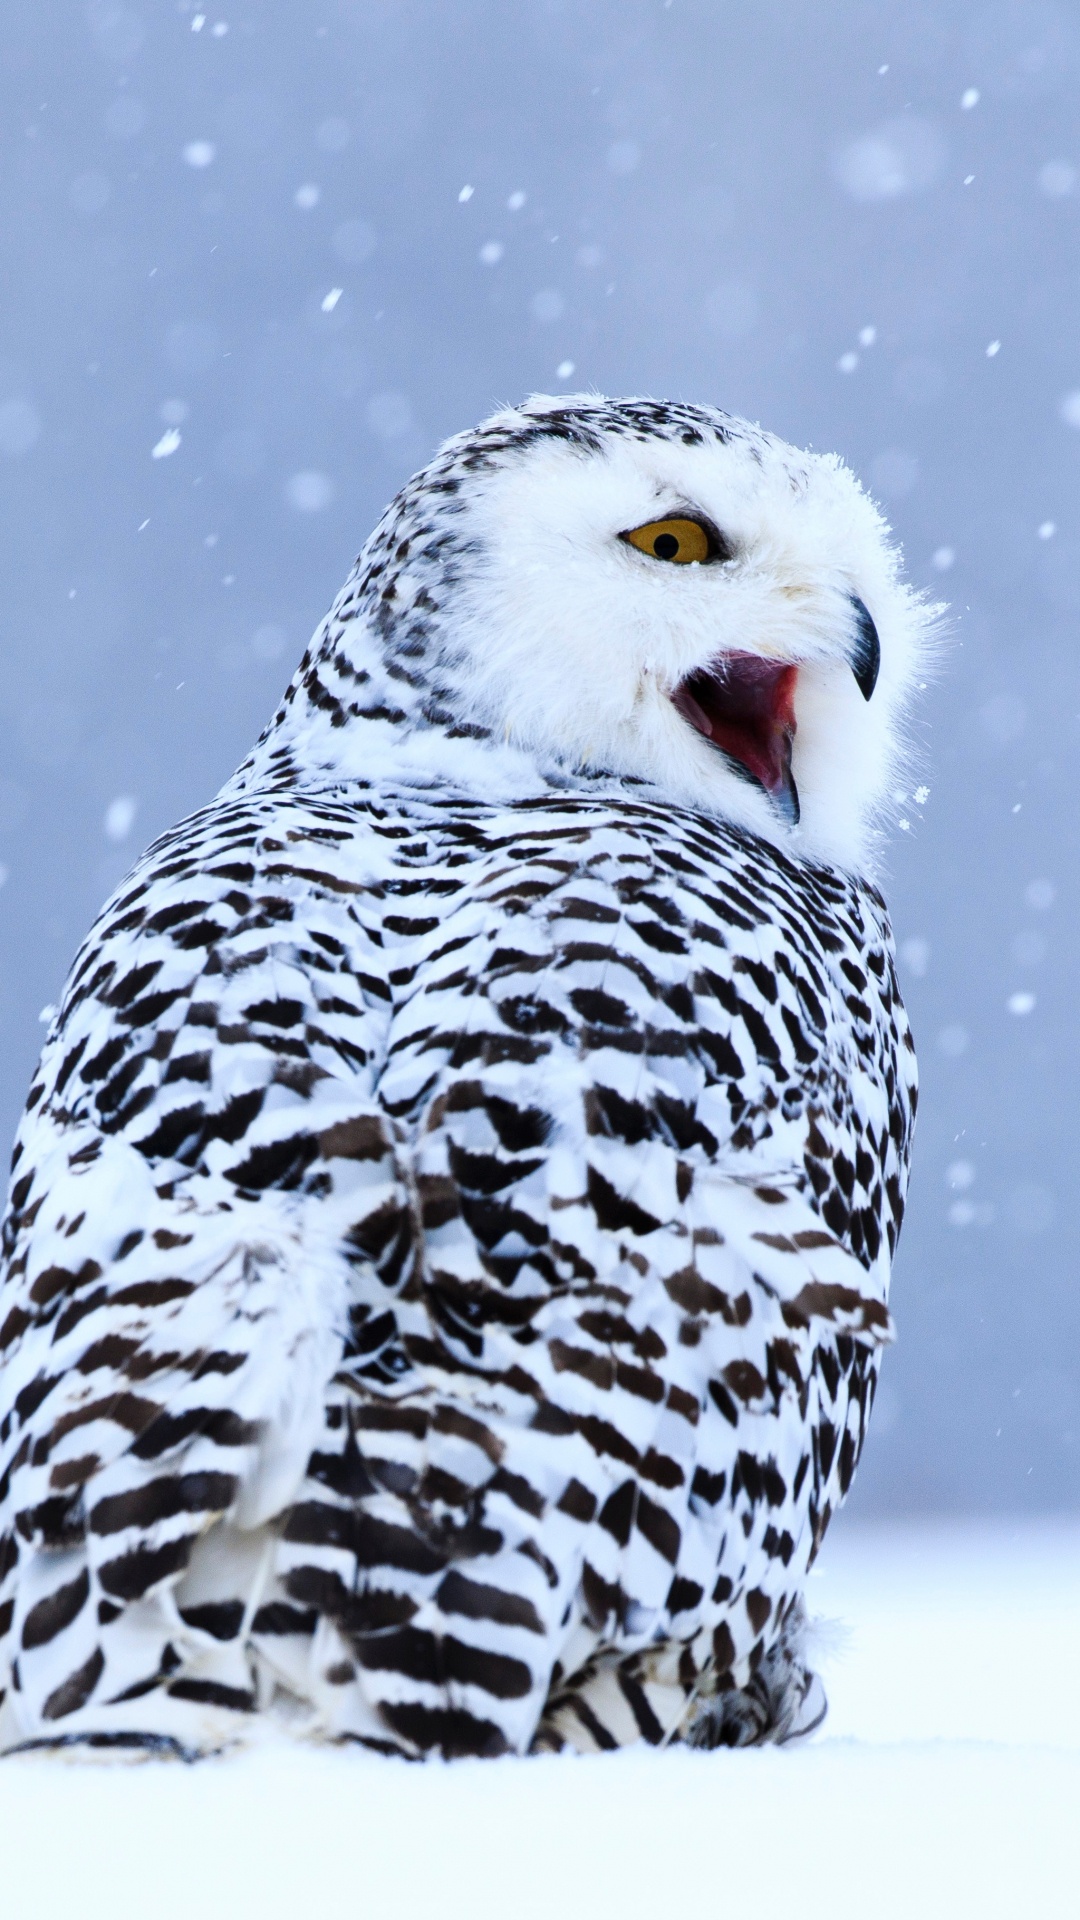 White and Black Owl on Snow Covered Ground During Daytime. Wallpaper in 1080x1920 Resolution